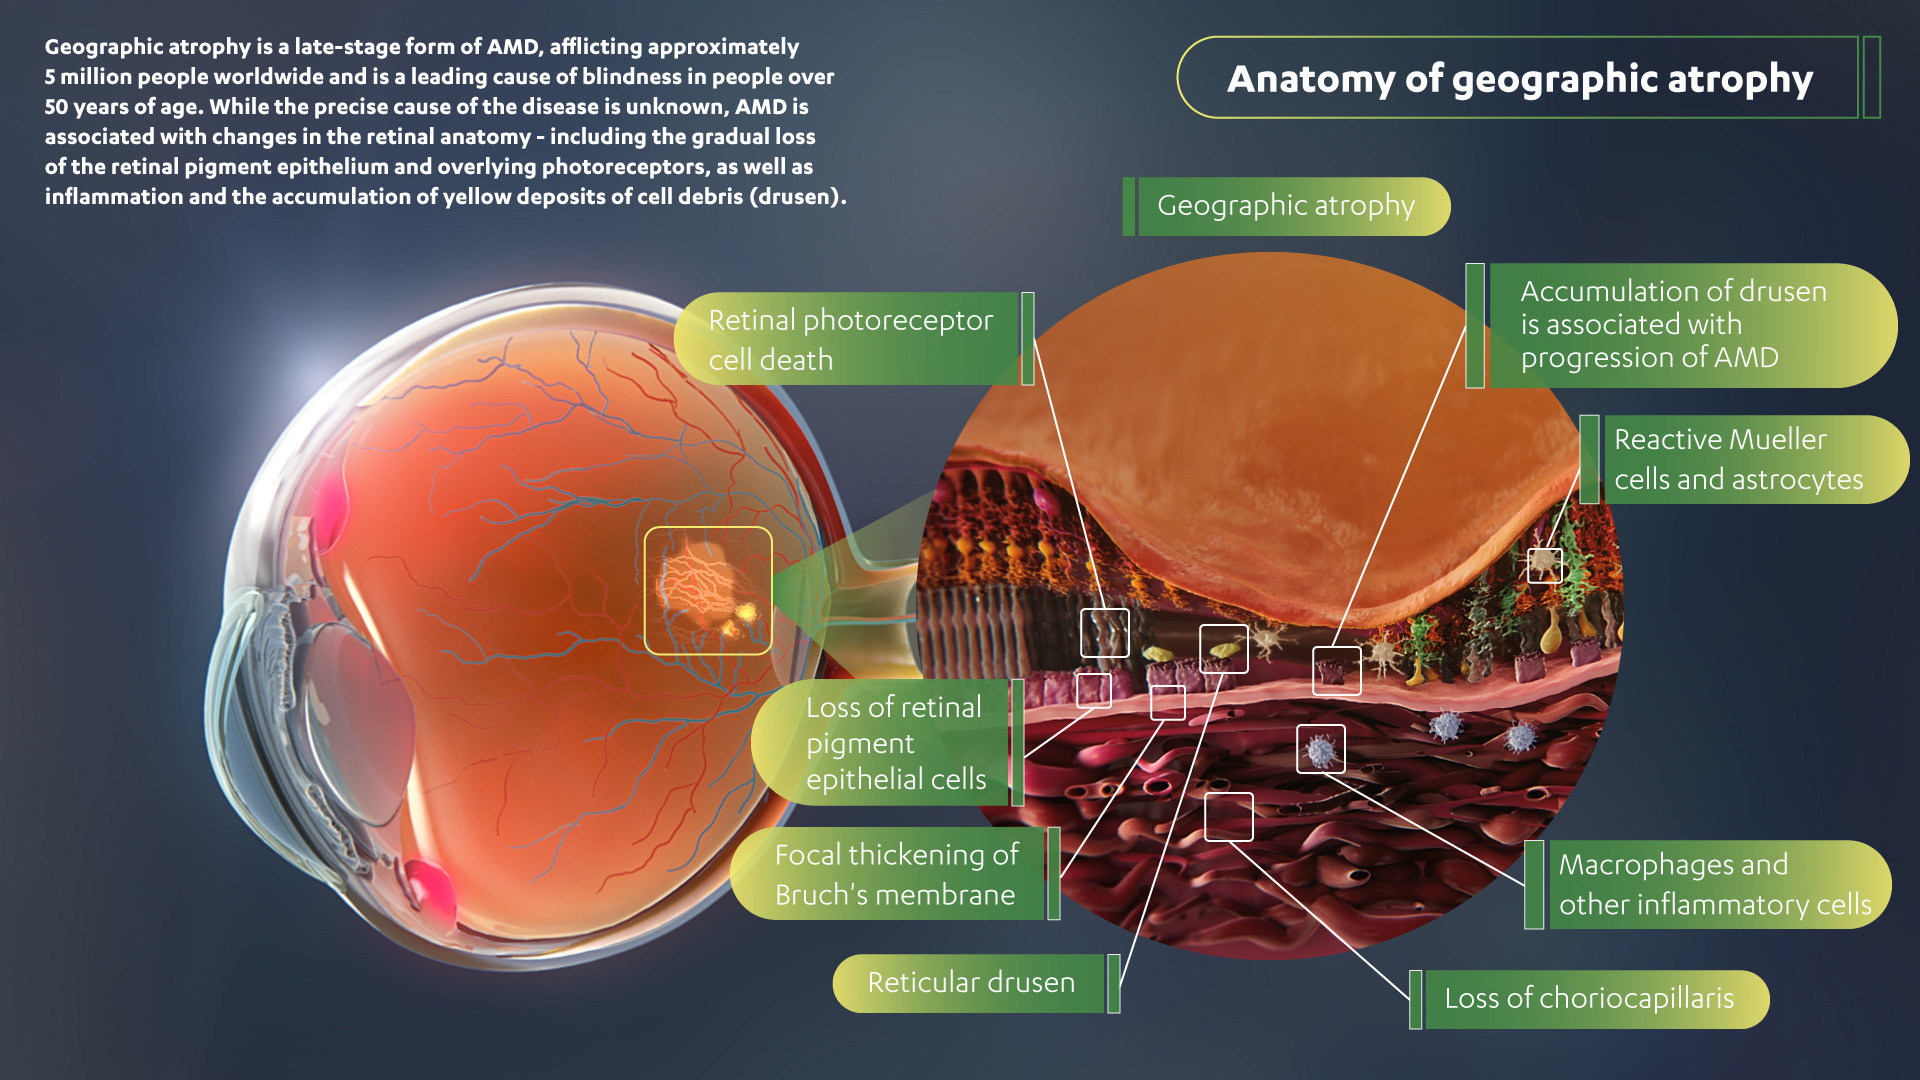 Geographic atrophy is a late-stage form of age-related macular degeneration (AMD), afflicting approximately 5 million people worldwide